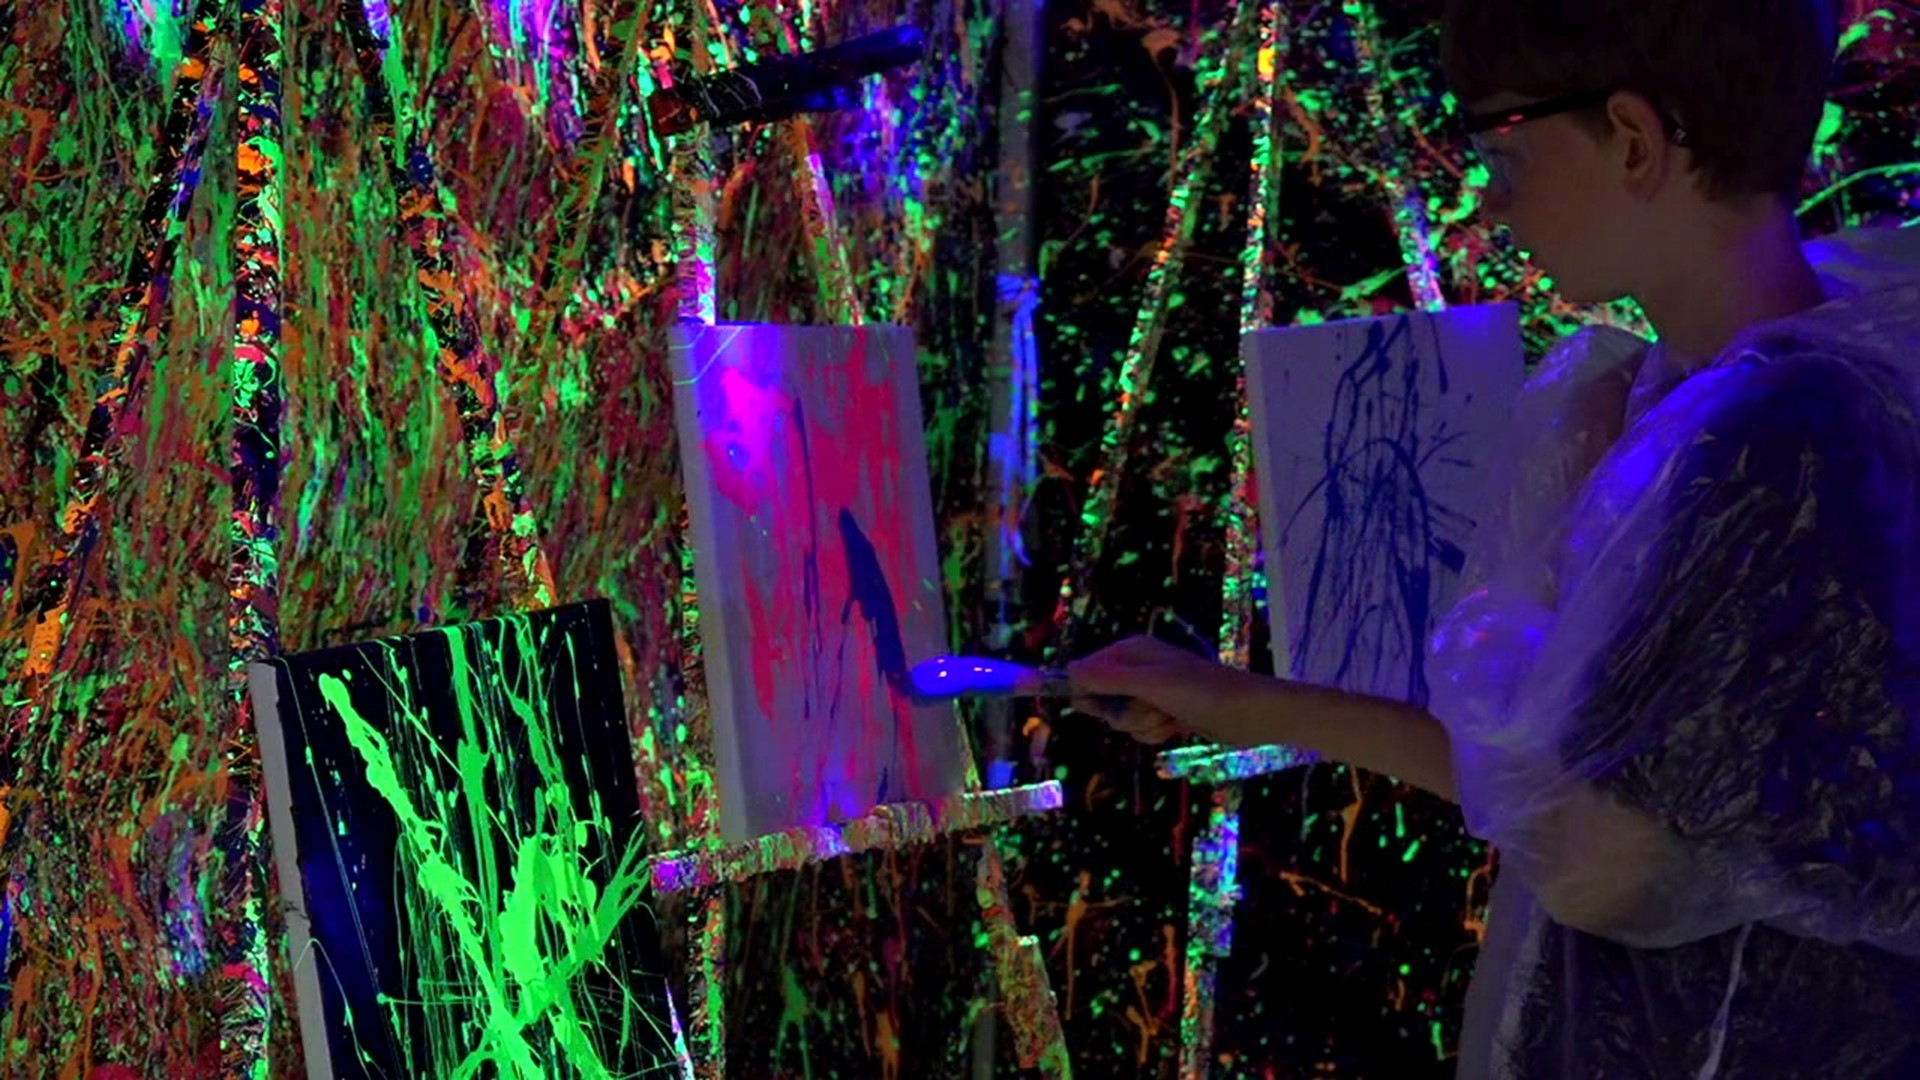 An art studio in Schuylkill Haven recently expanded to add a splatter room, and students were able to try it firsthand on Monday.